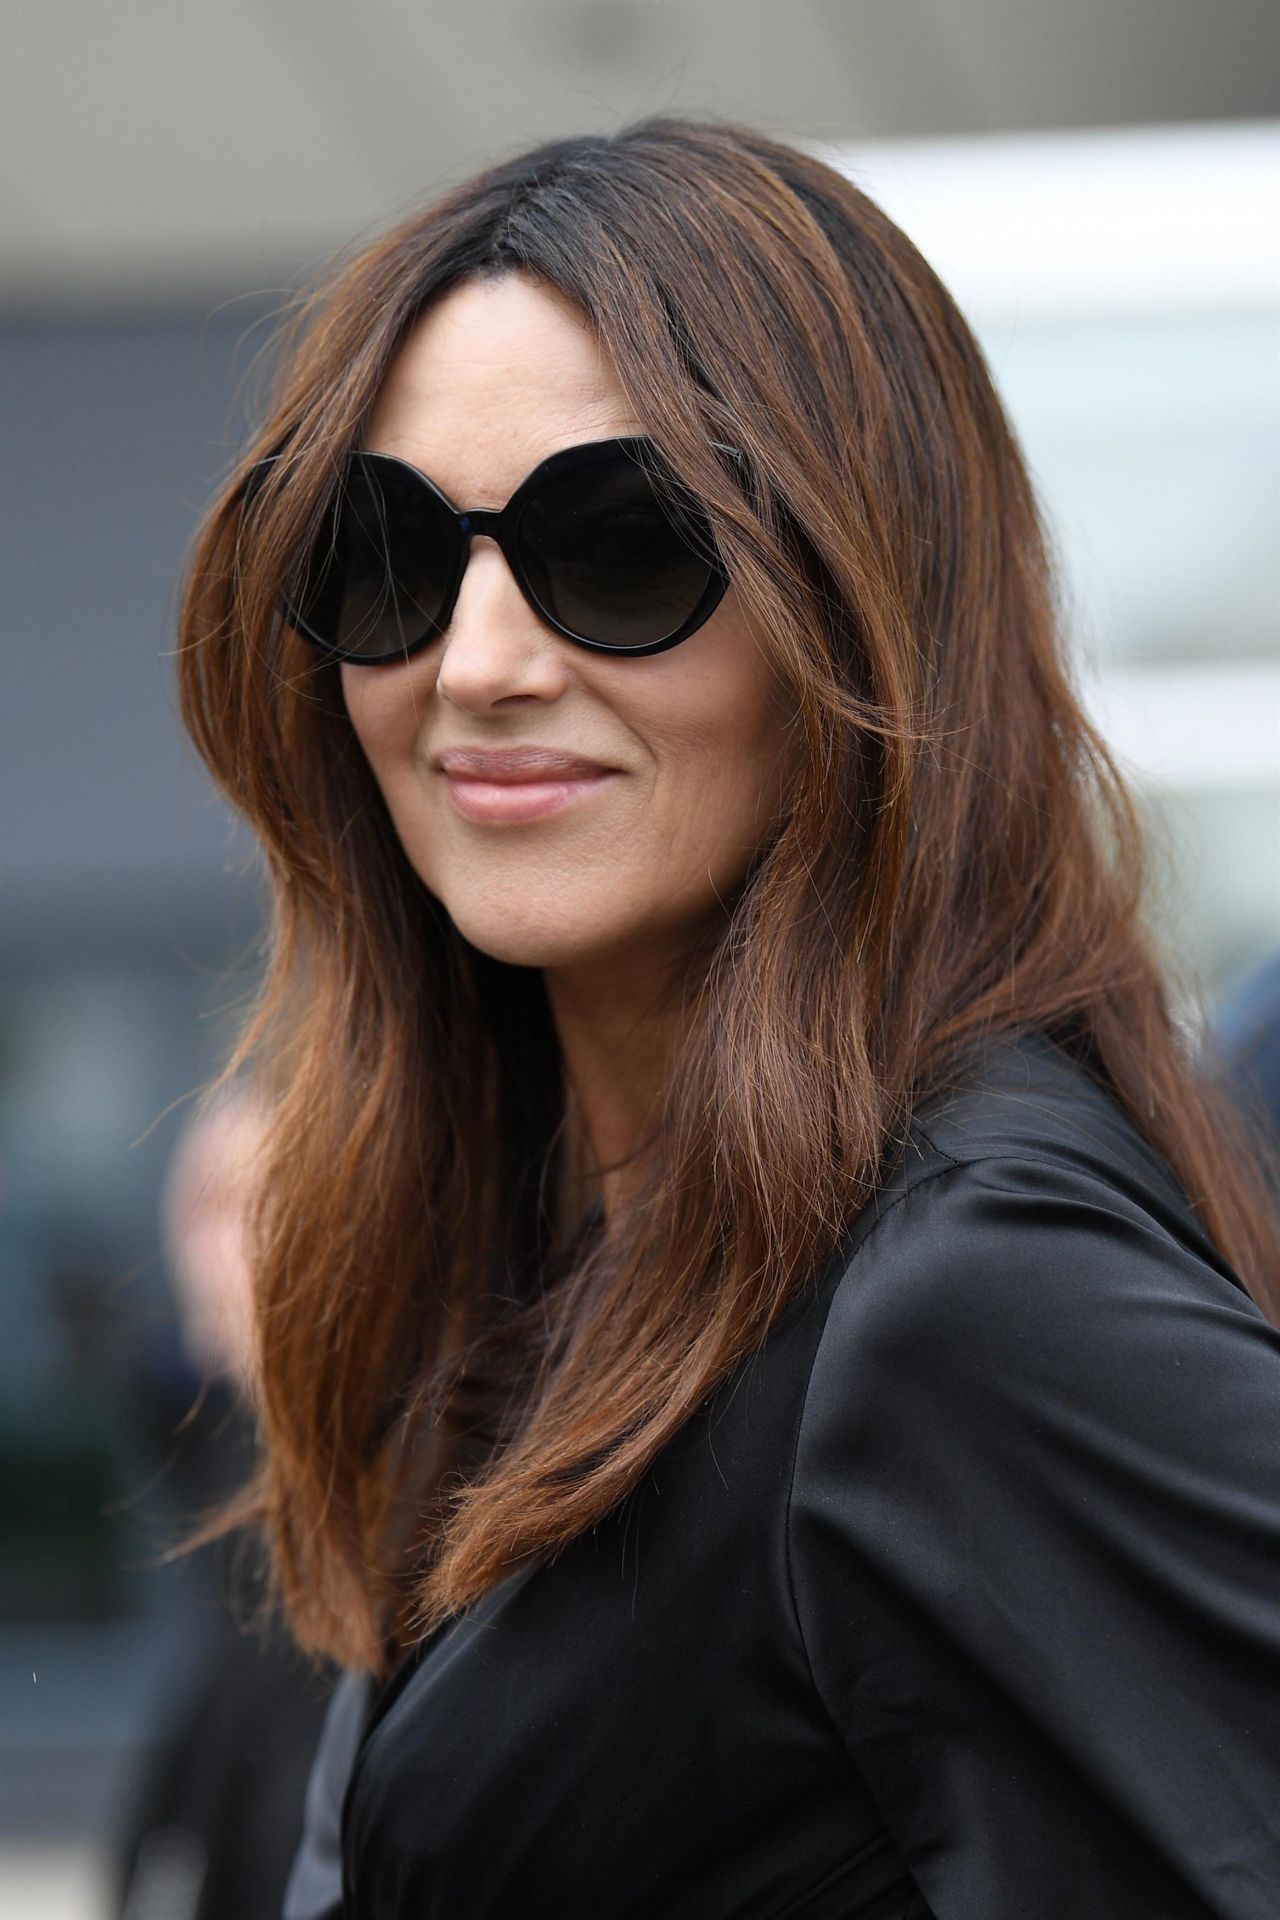 monica-bellucci-the-best-years-of-a-life-photocall-at-cannes-film-festival-11.jpg